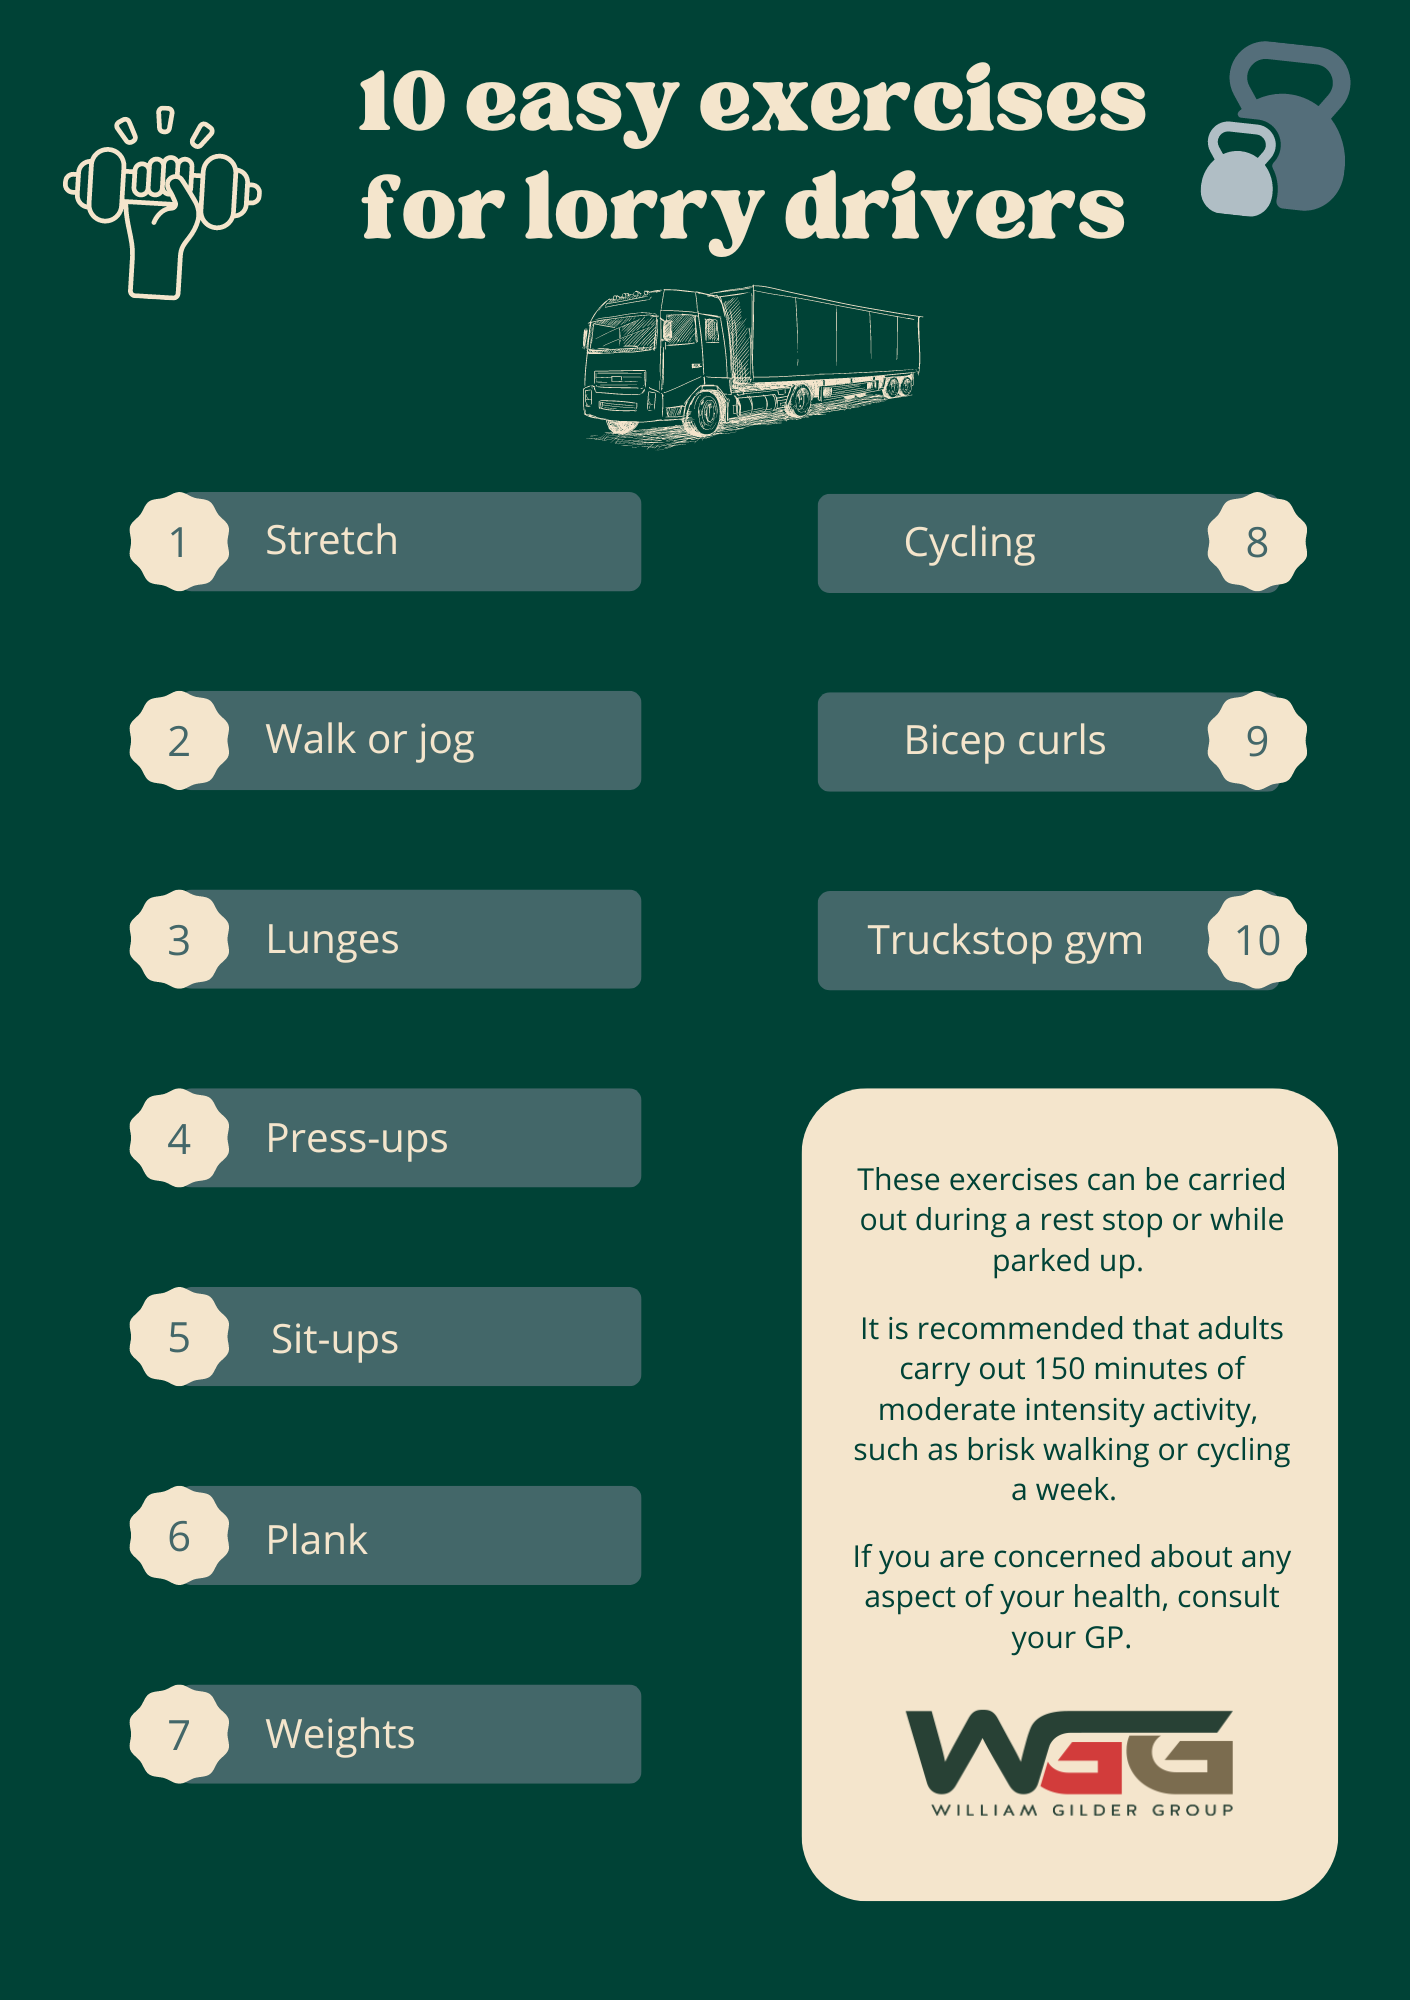 An infographic describing exercises for lorry drivers